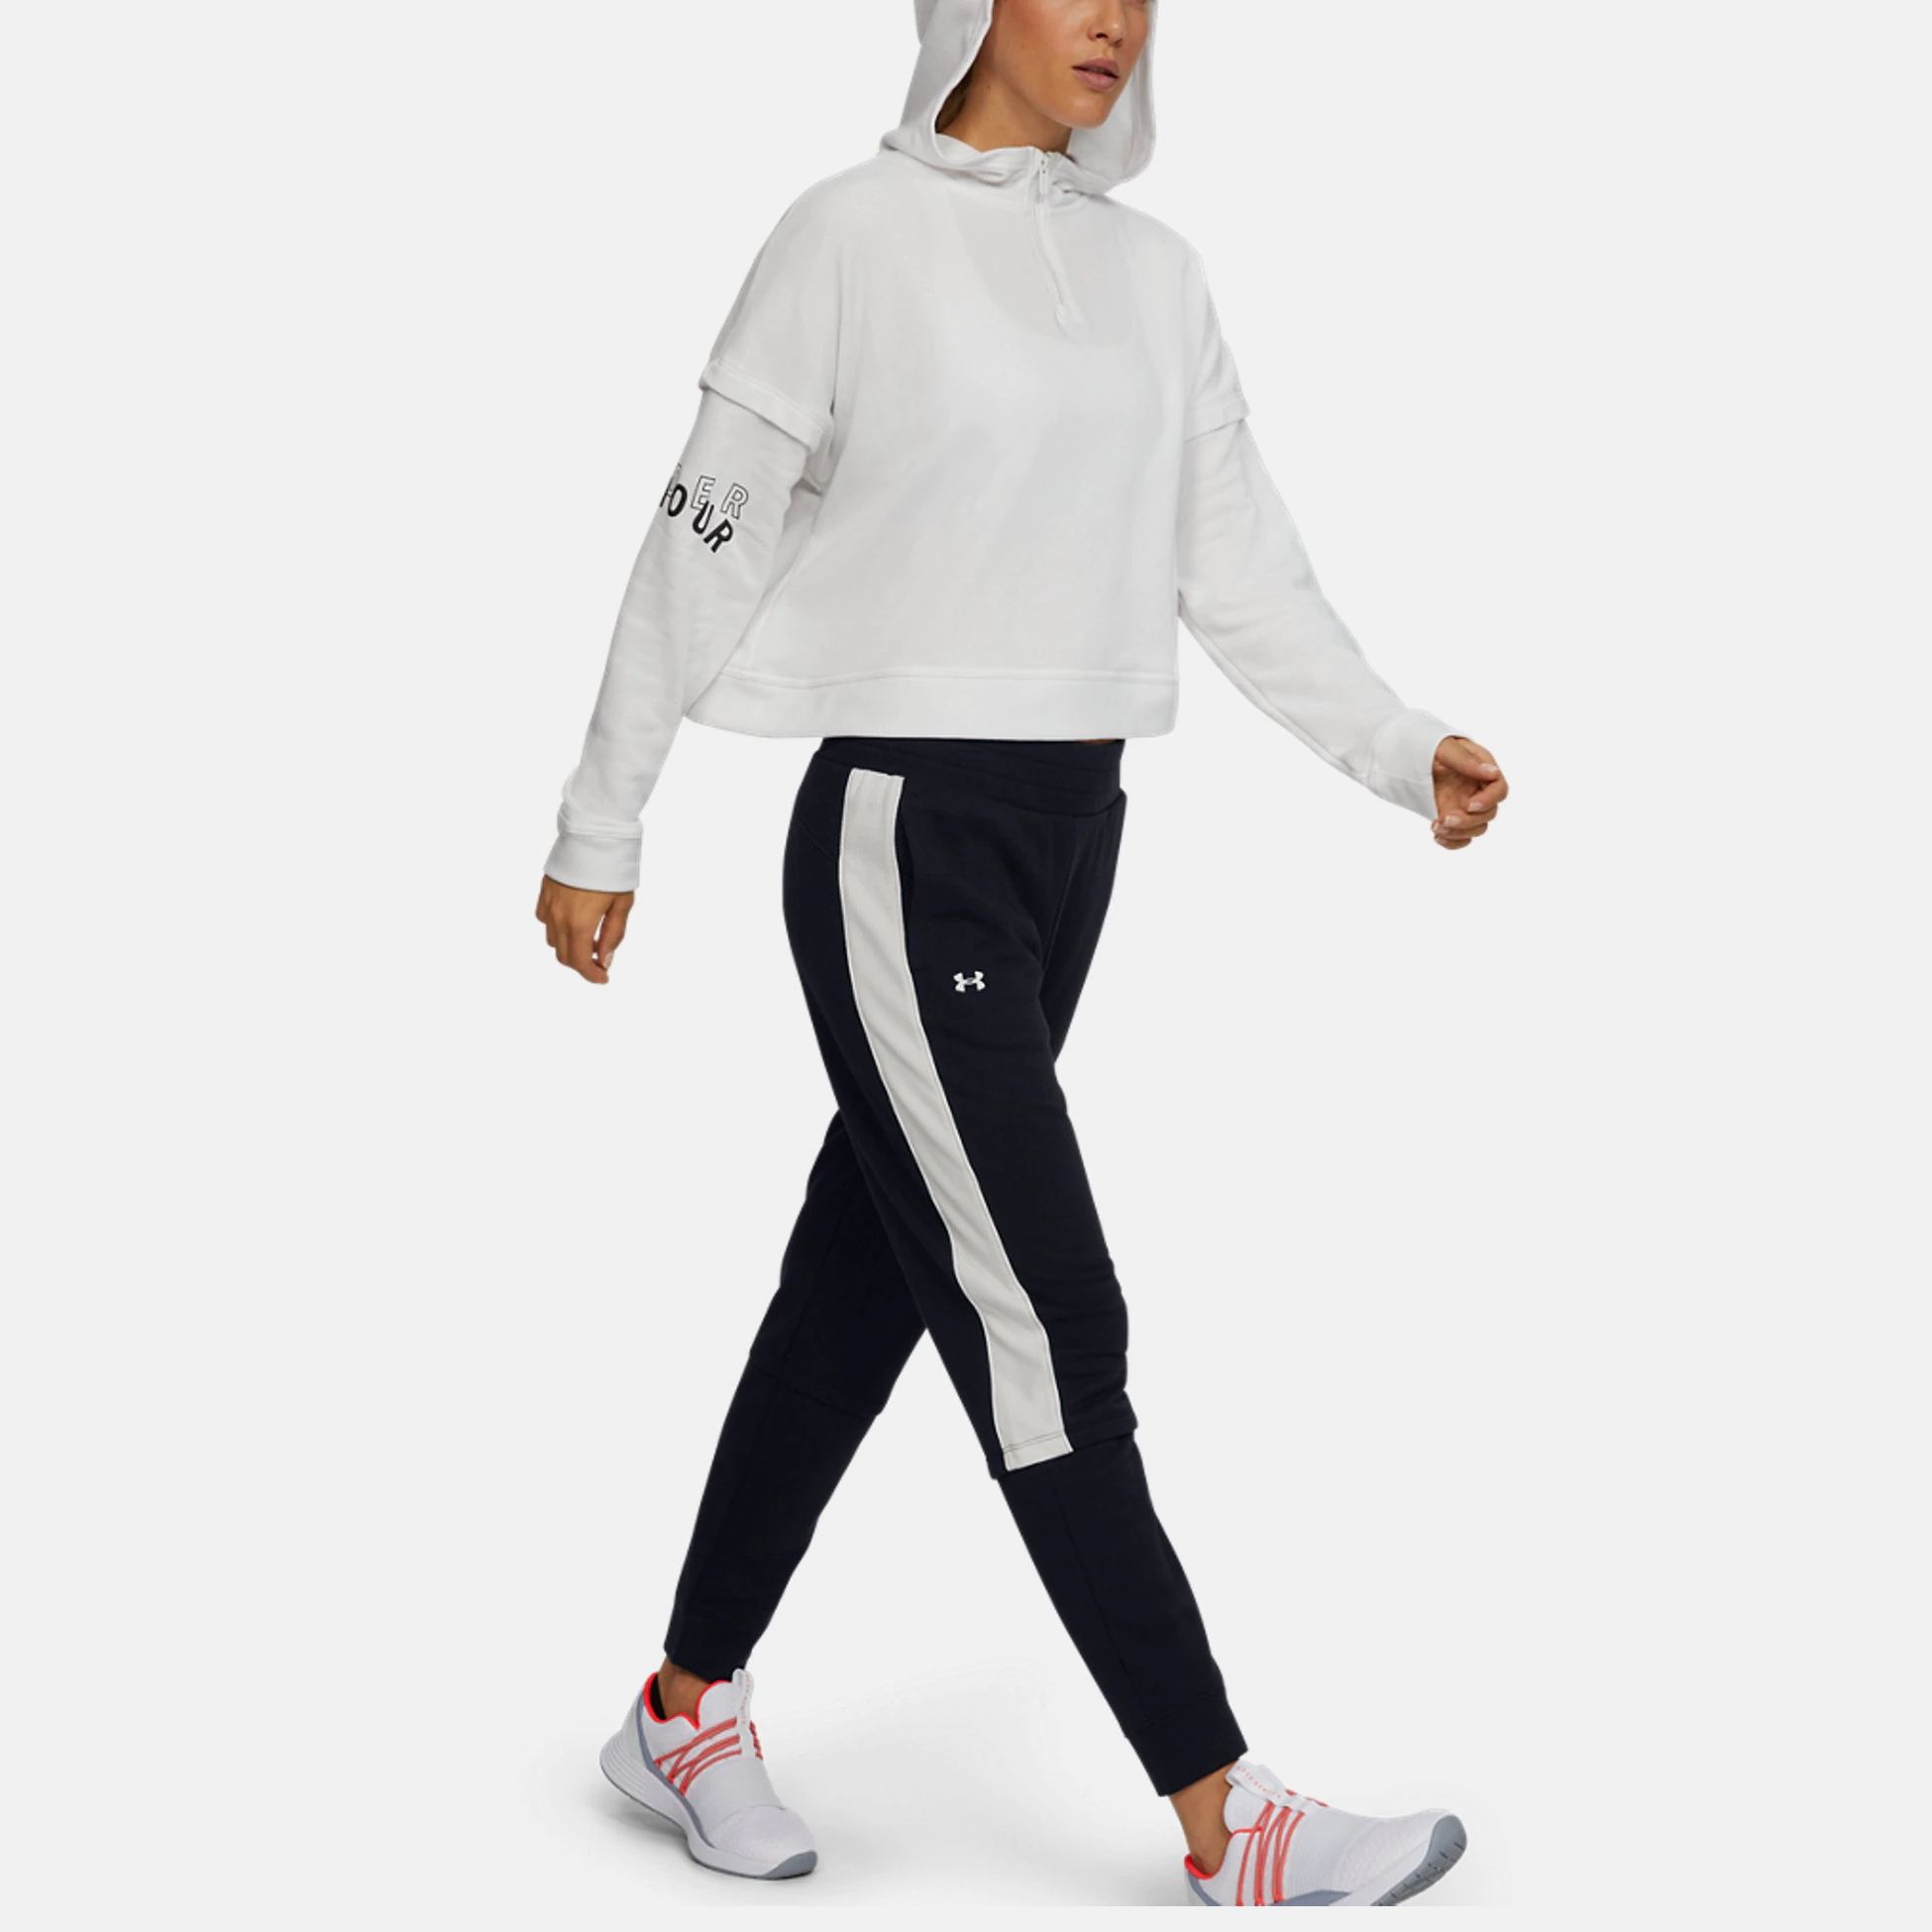 https://img2.sportconcept.com/backend_nou/content/images/-ua-rival-terry-joggers-1889-20200519173449.jpg